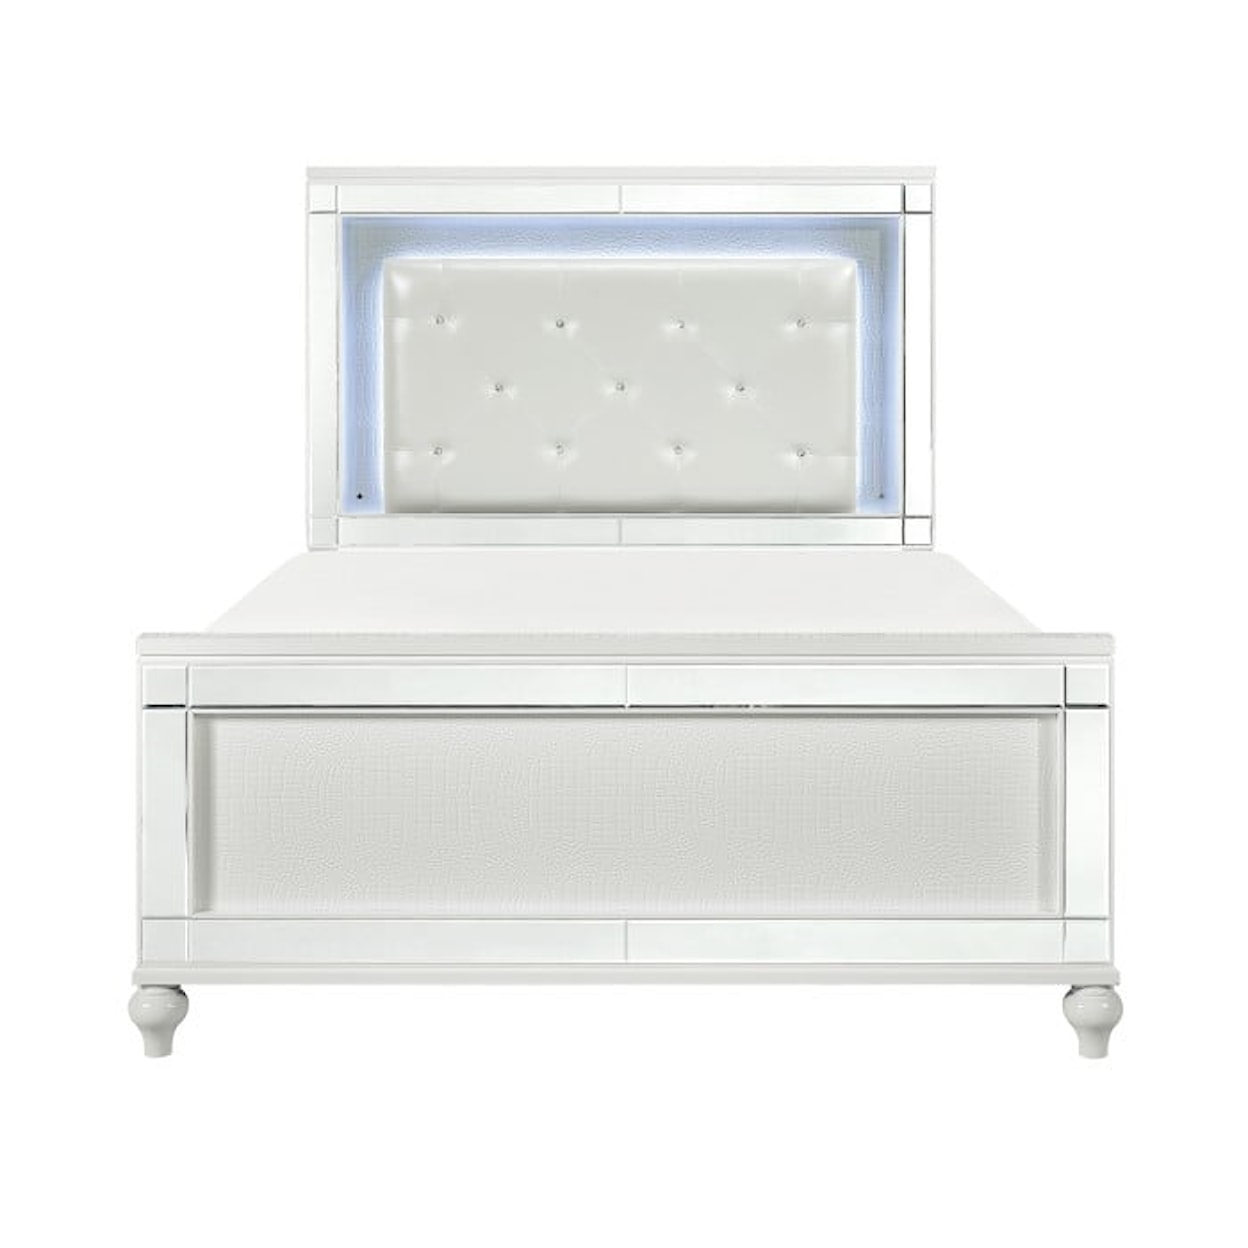 Homelegance Alonza Queen Bed with LED Lighting